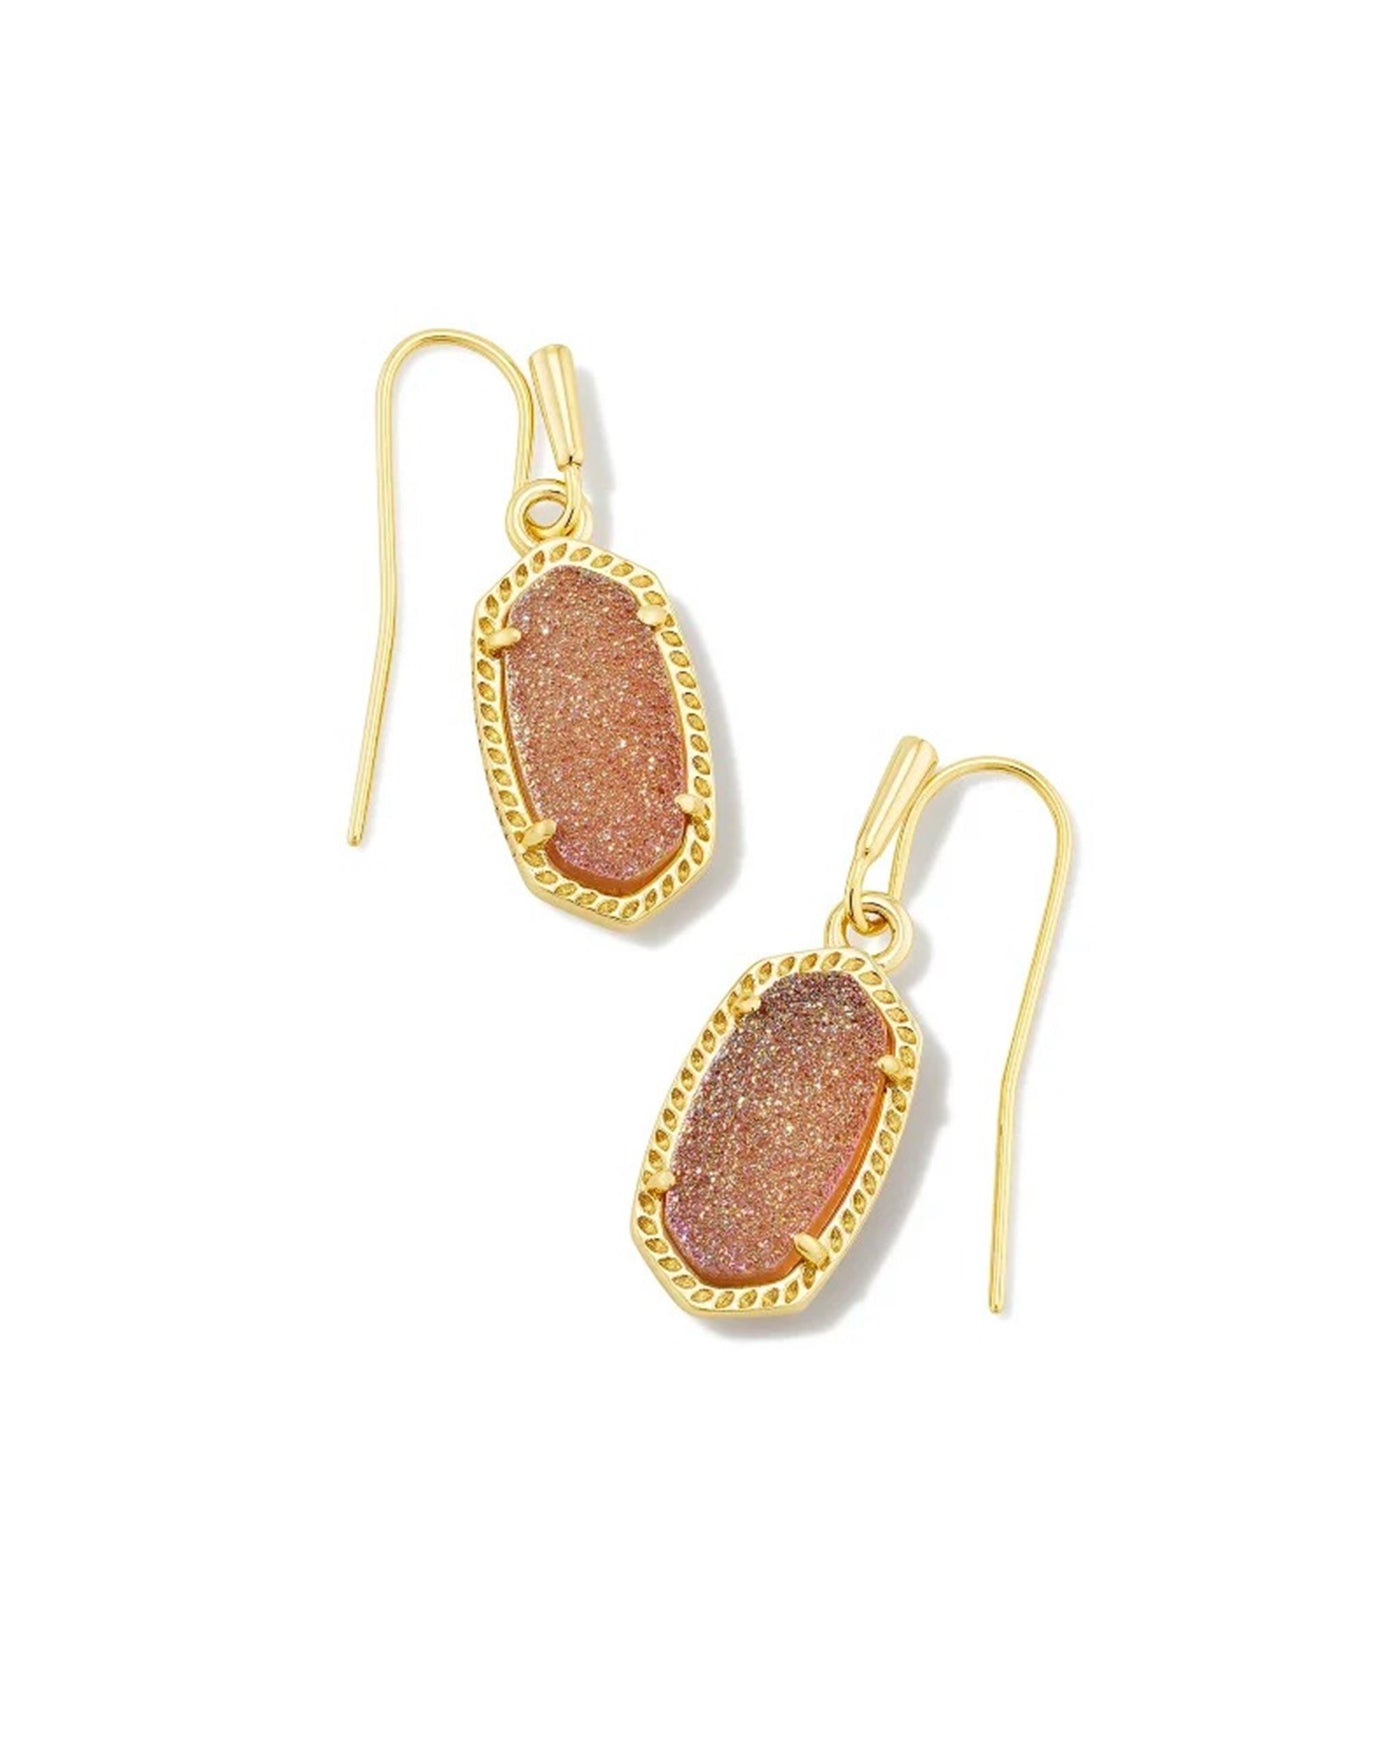 Gold Tone Earrings Featuring Gold Spice Drusy by Kendra Scott